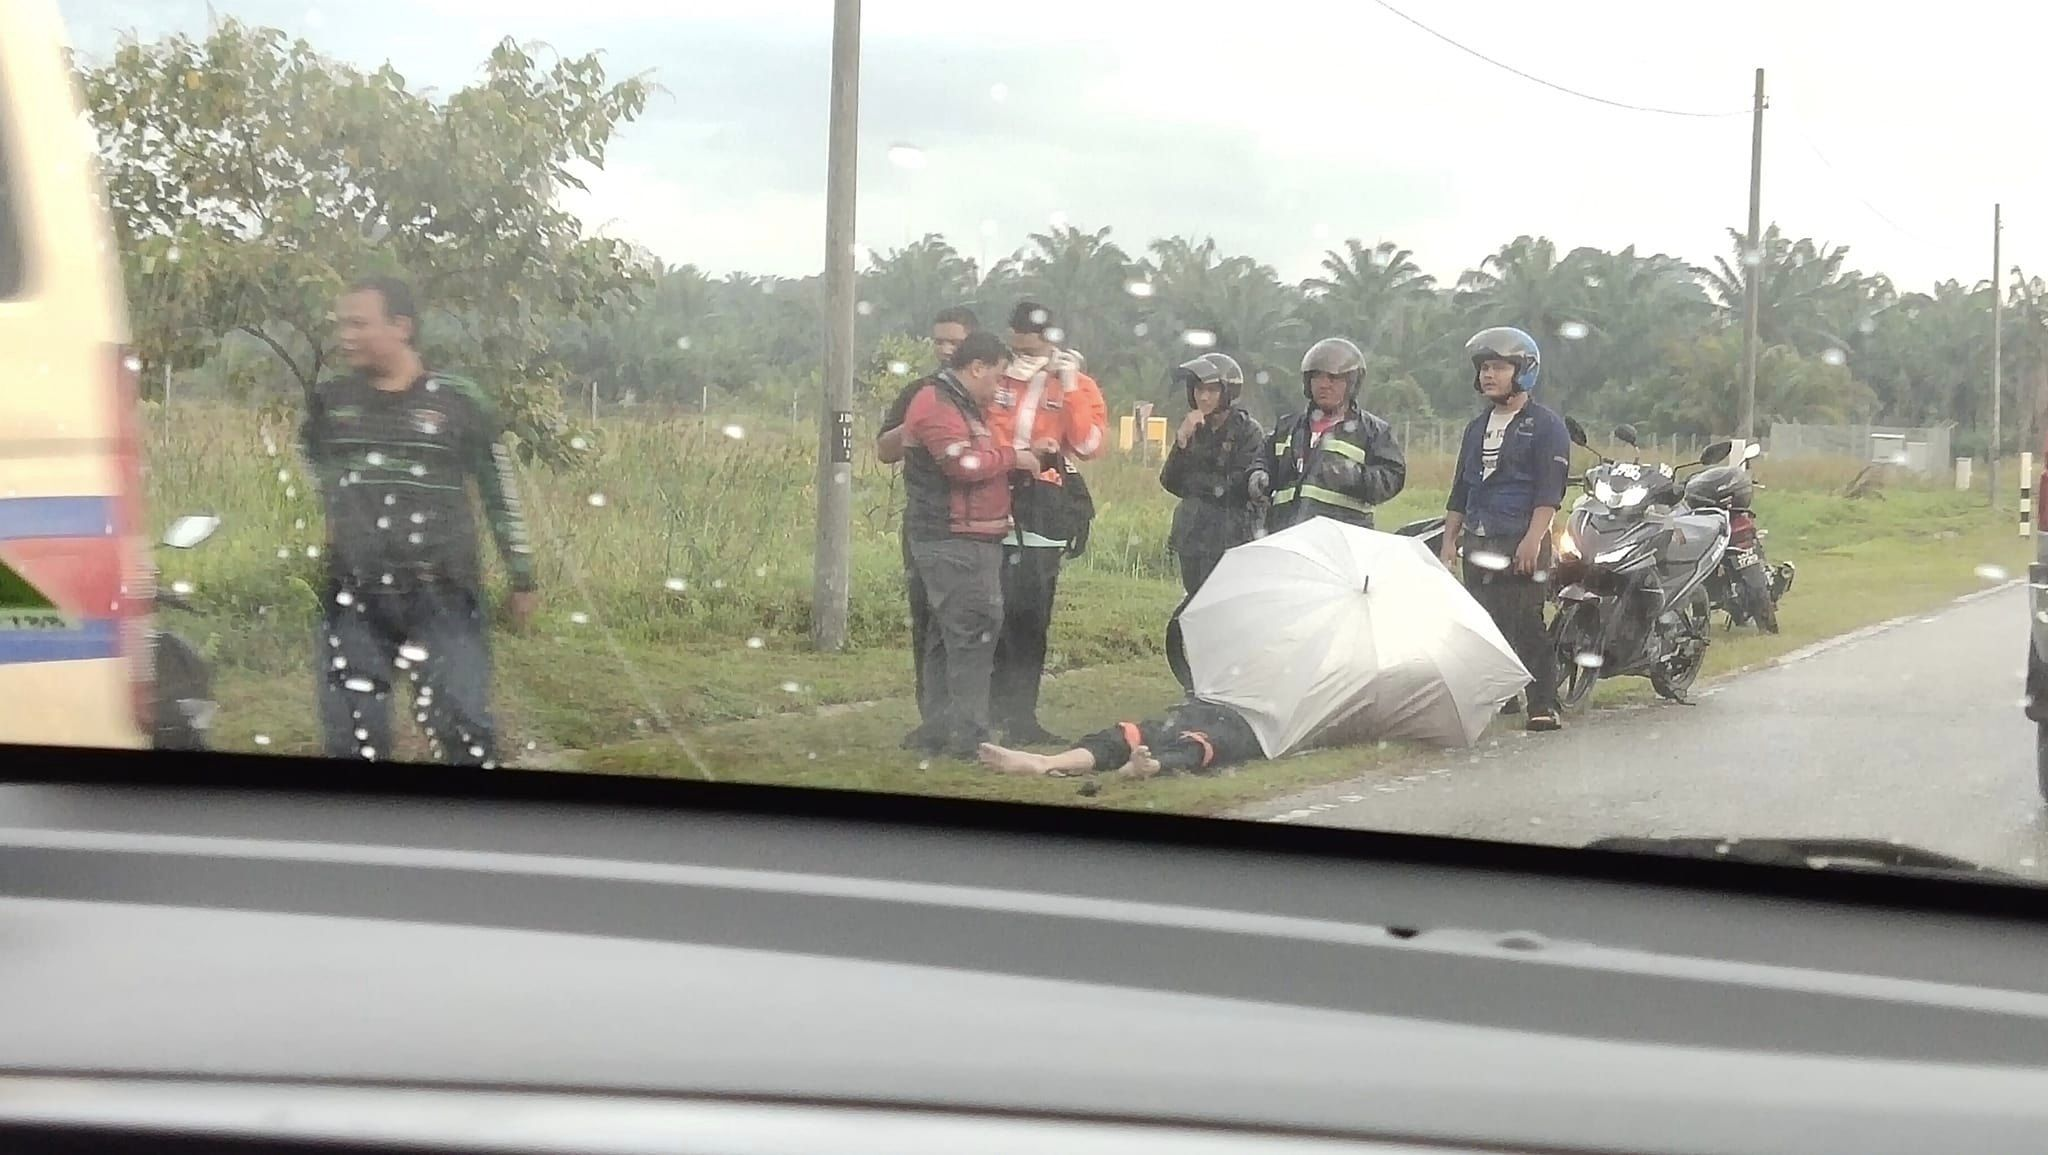 M'sian motorcyclist gets struck by lightning and dies while on the way to work